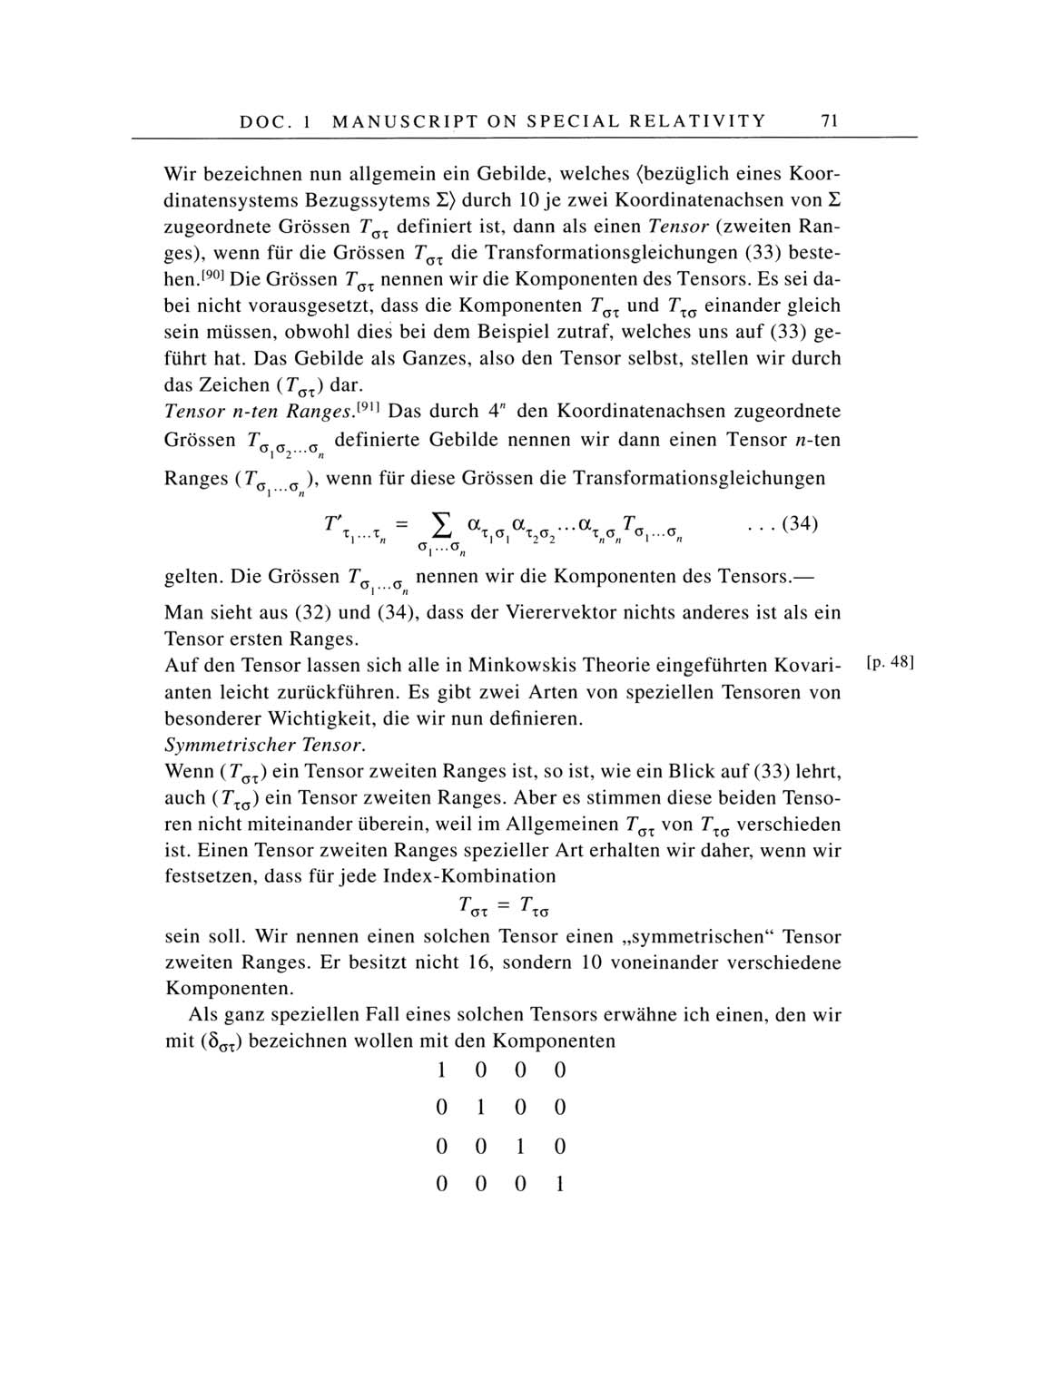 Volume 4: The Swiss Years: Writings 1912-1914 page 71